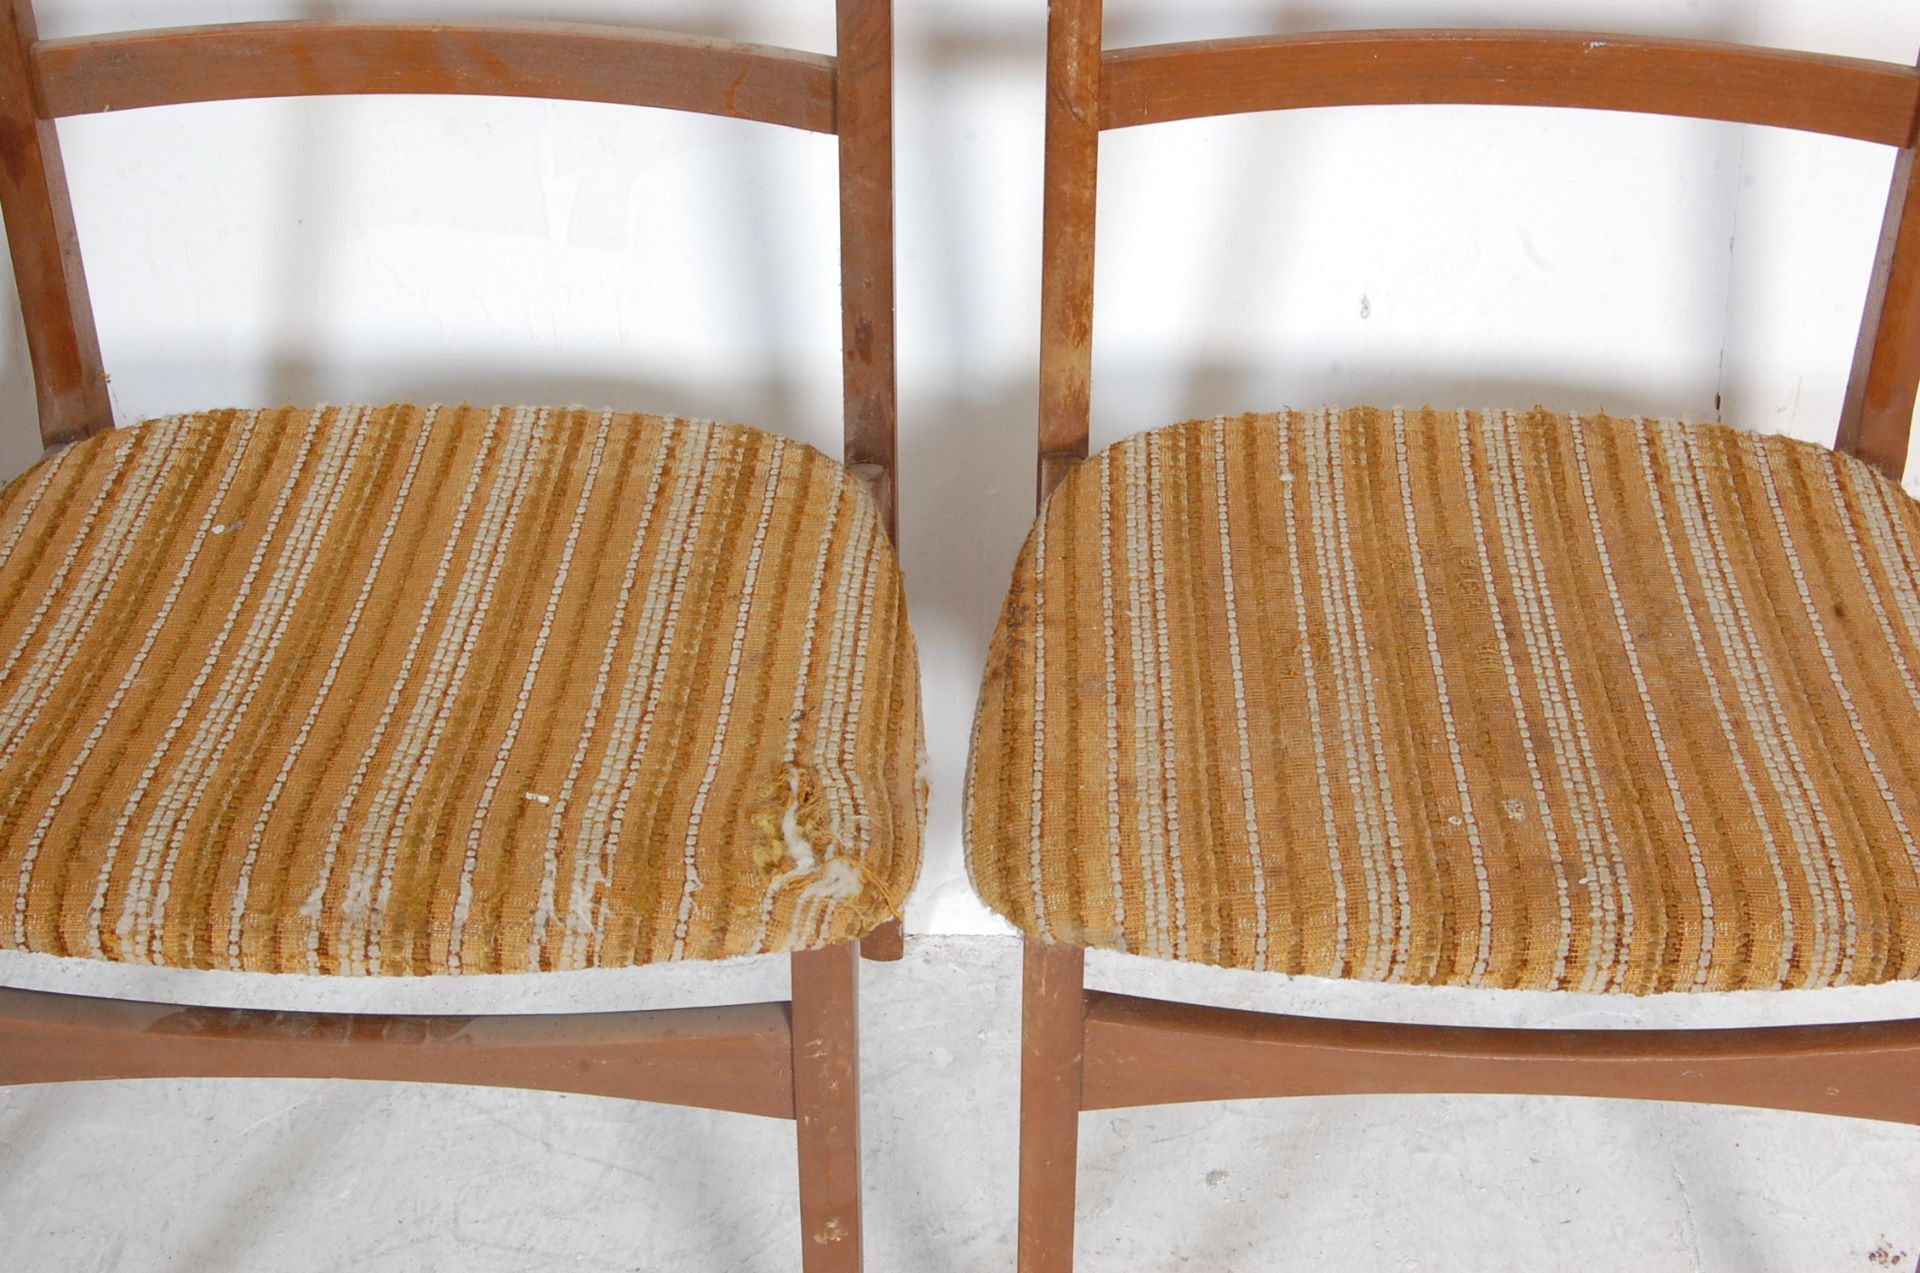 FOUR VINTAGE TEAK WOOD FRAME DINING CHAIRS BY NATHAN - Image 4 of 6